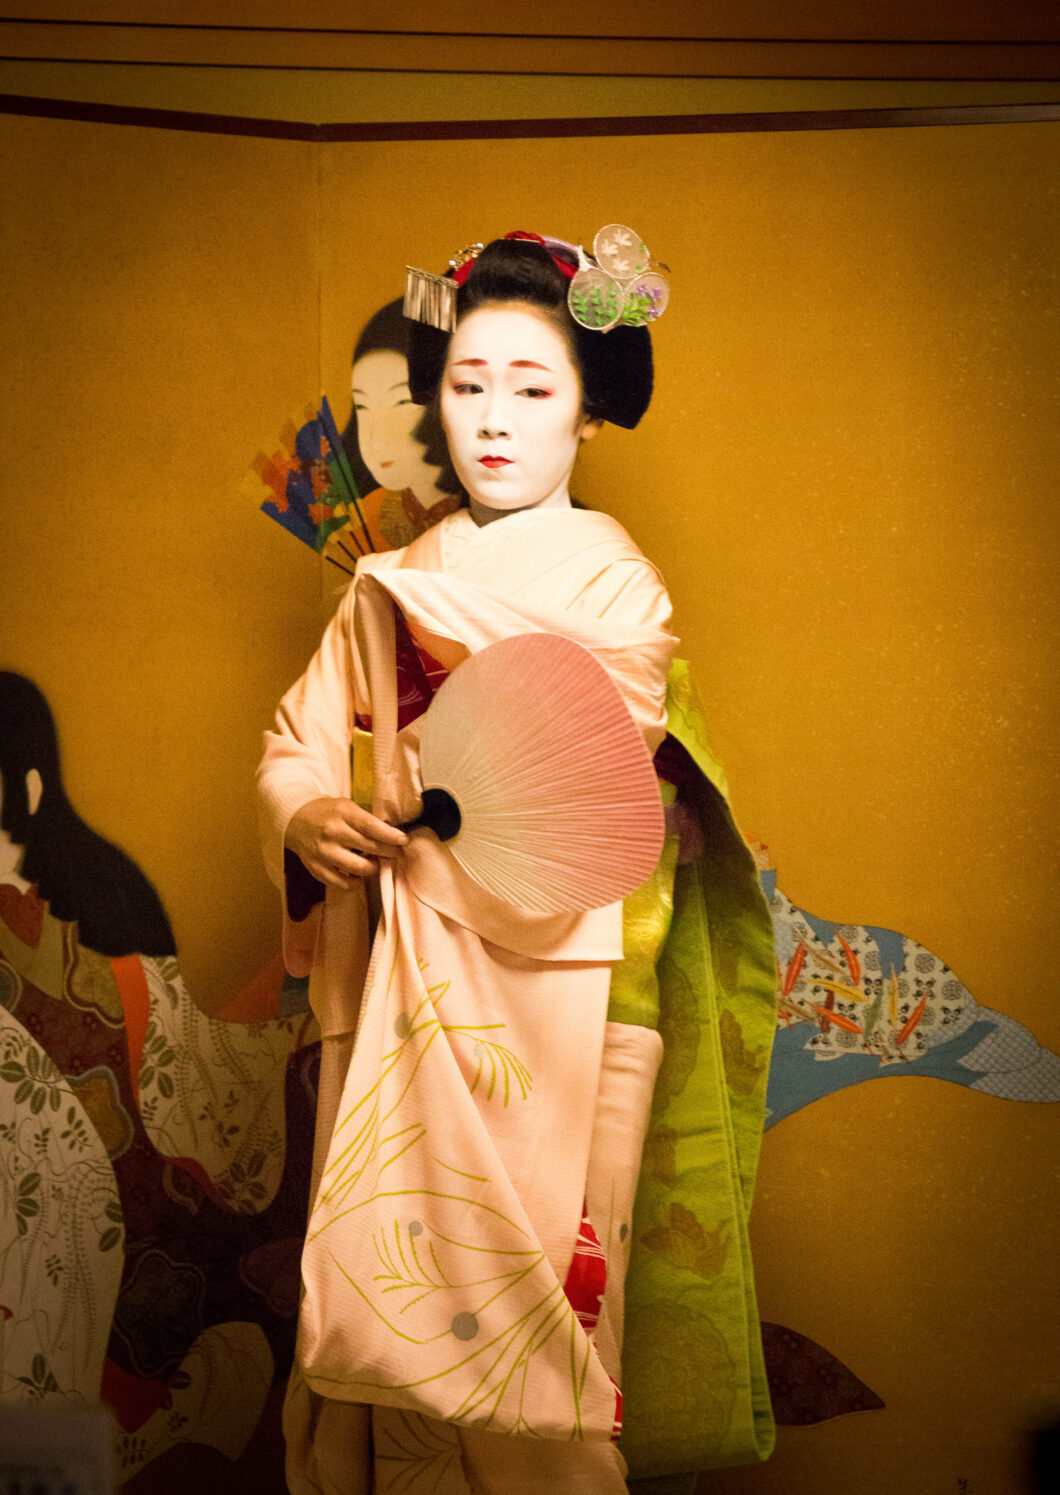 A Maiko performing in Kyoto